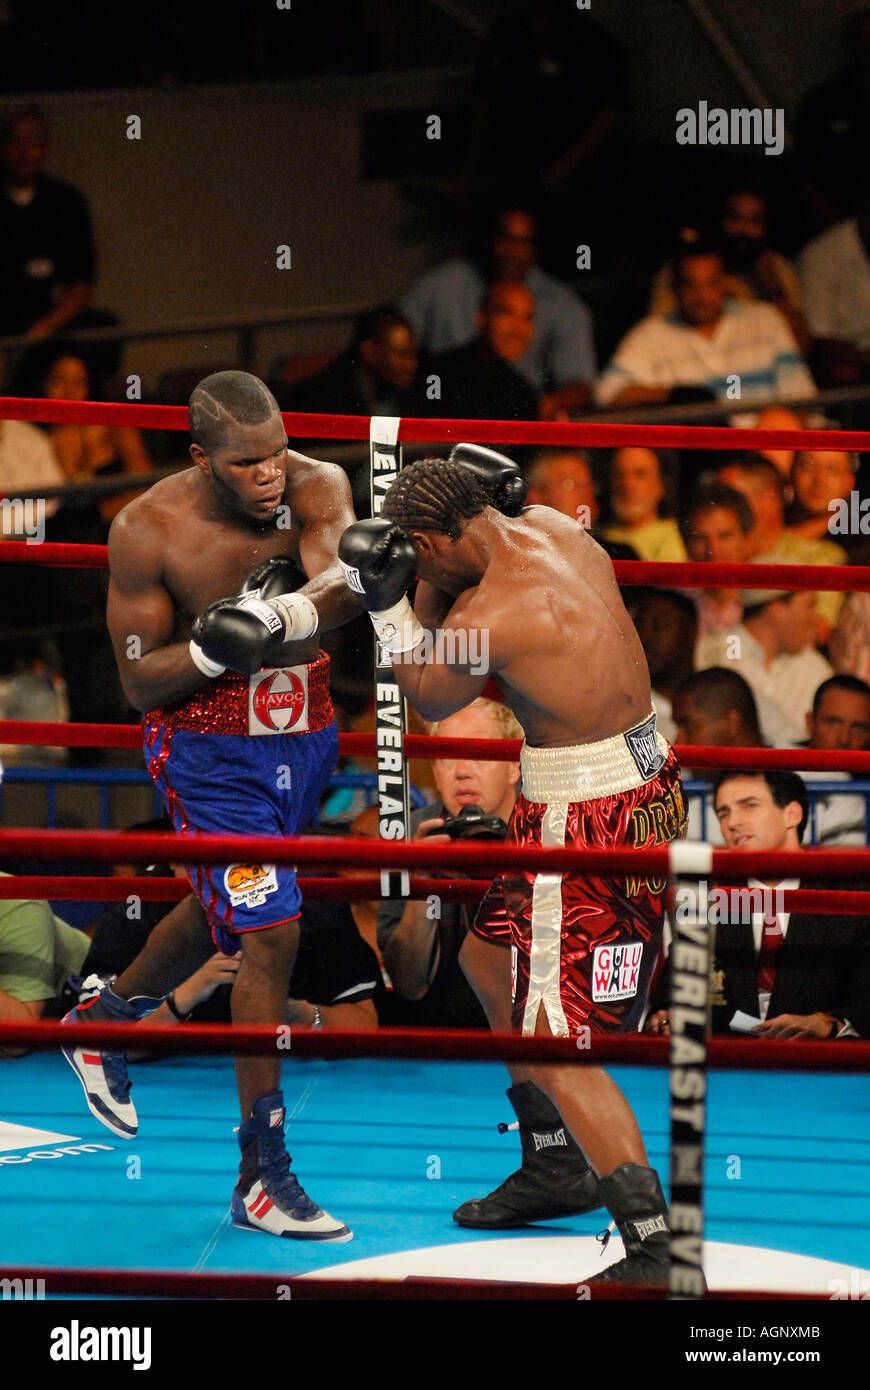 New York August 5 2006 HBO World Championship Boxing at the